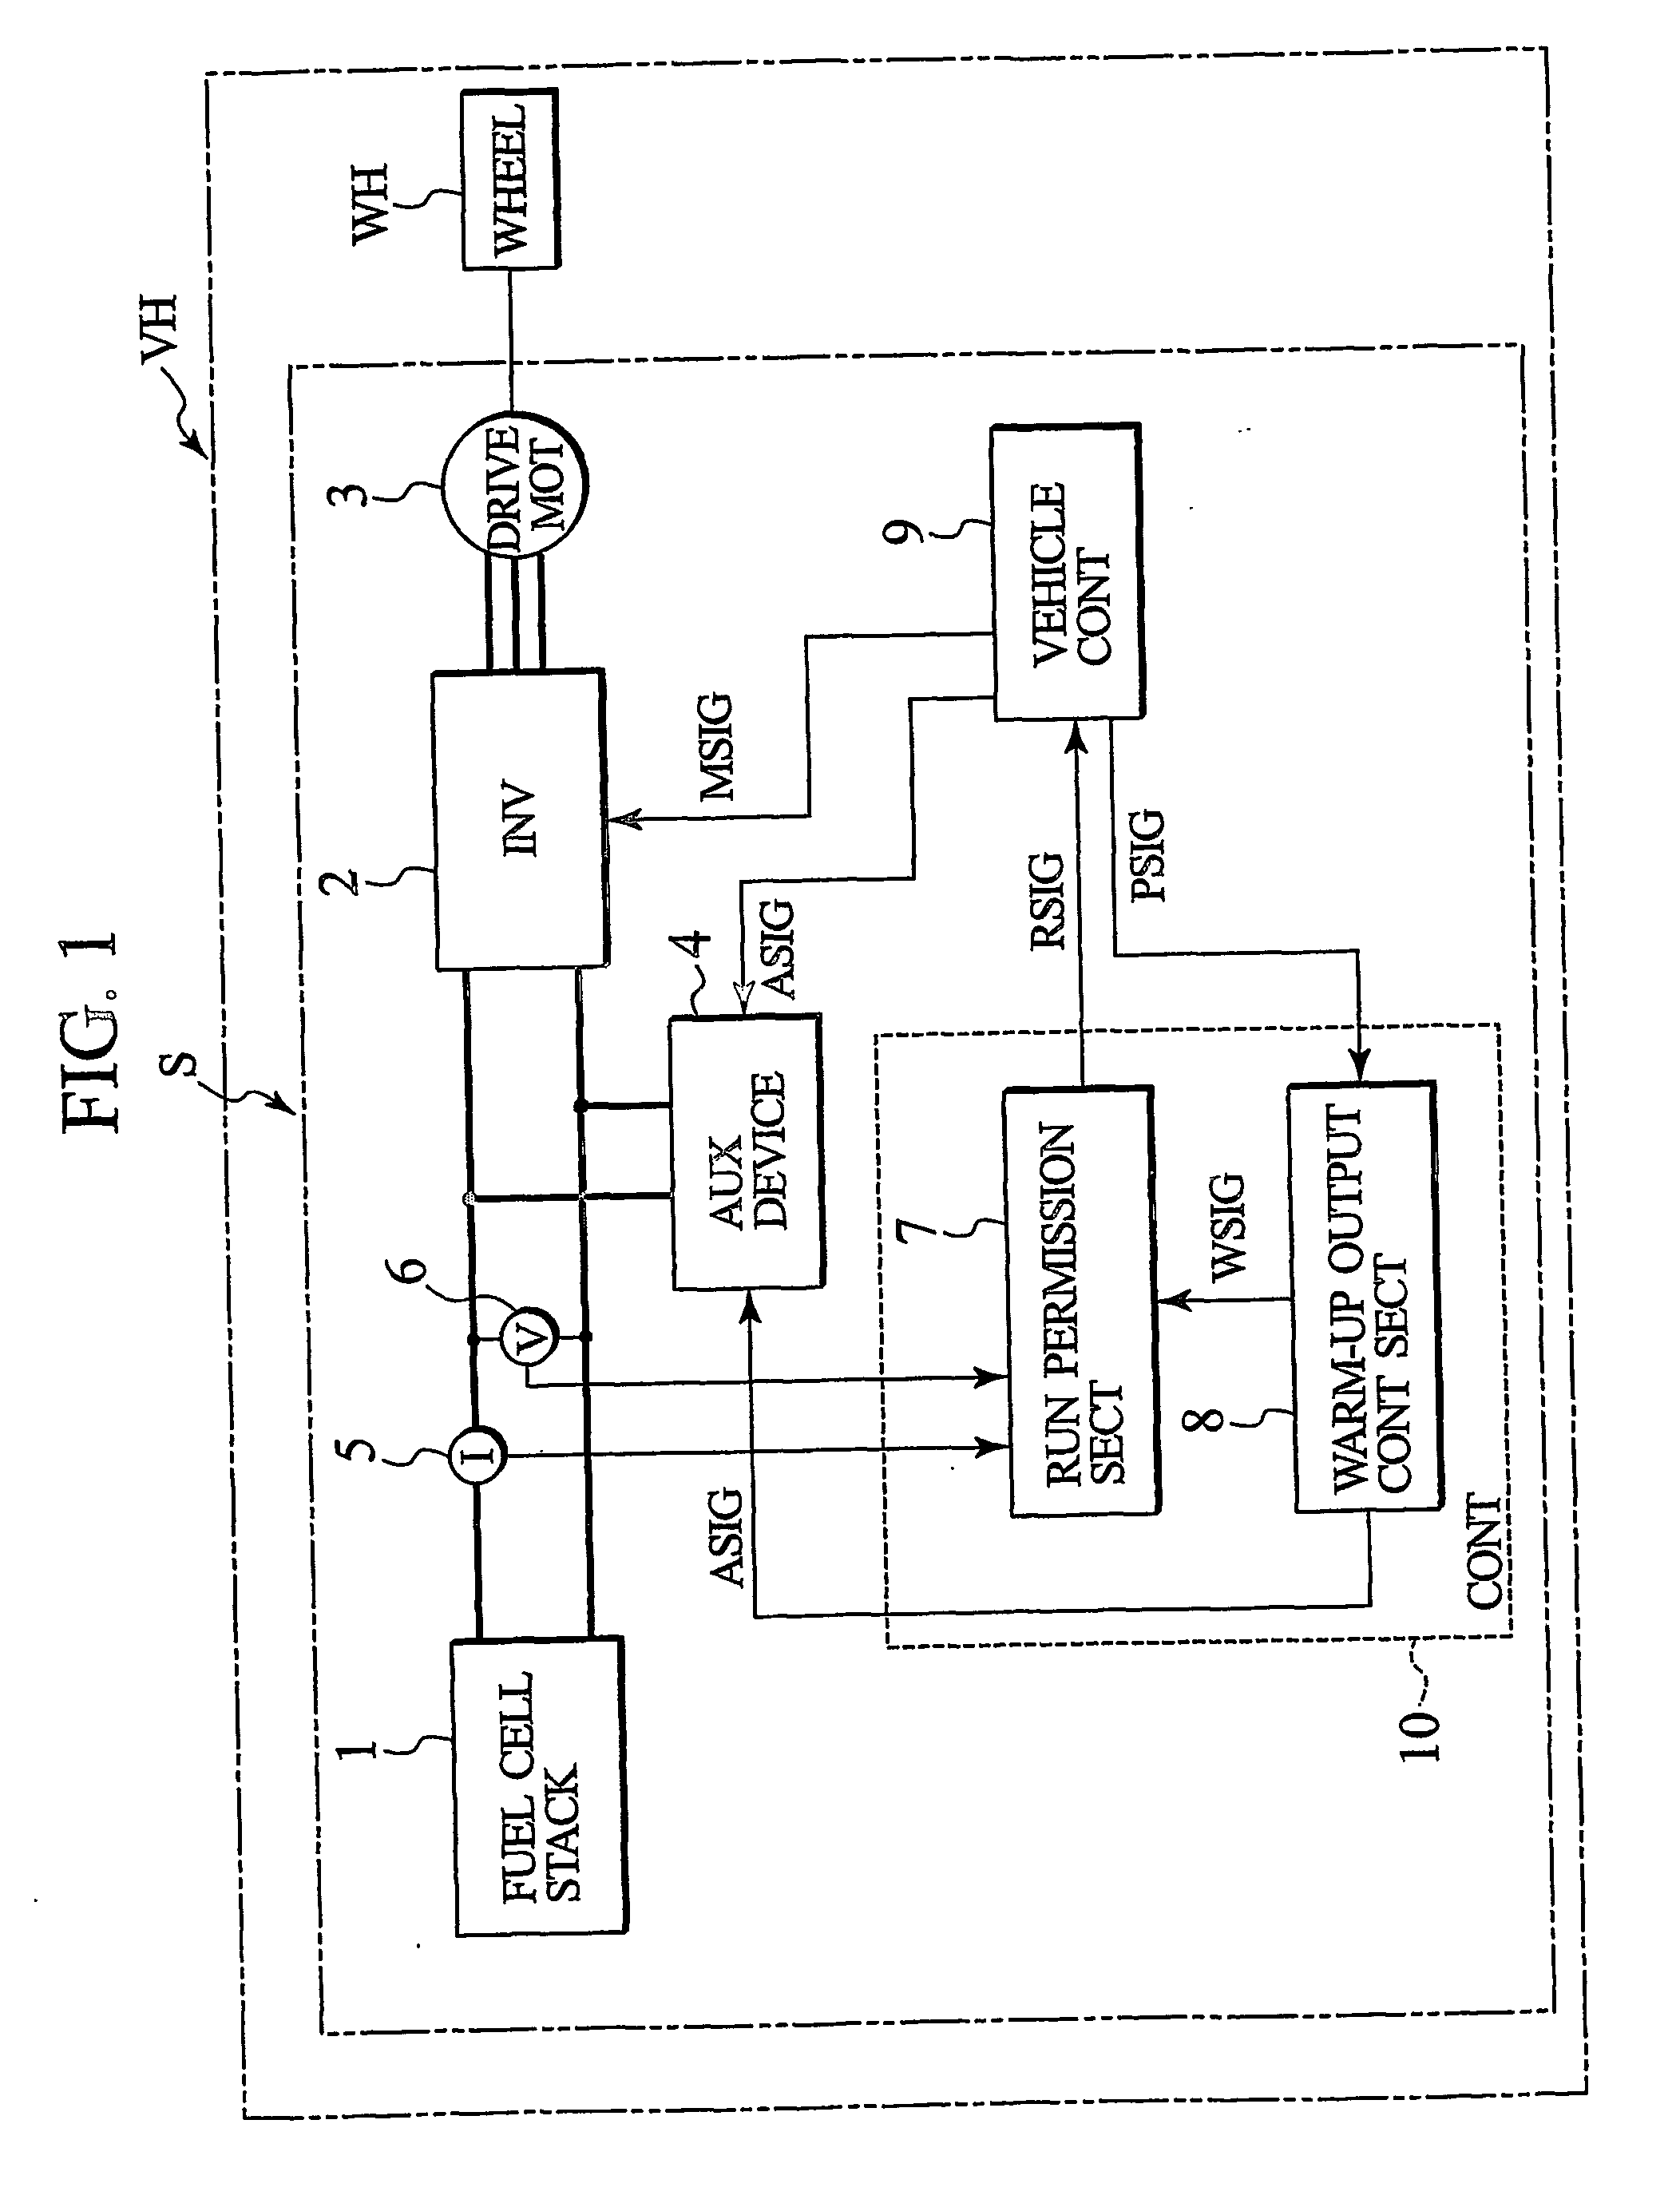 Control device of vehicular fuel cell system and related method